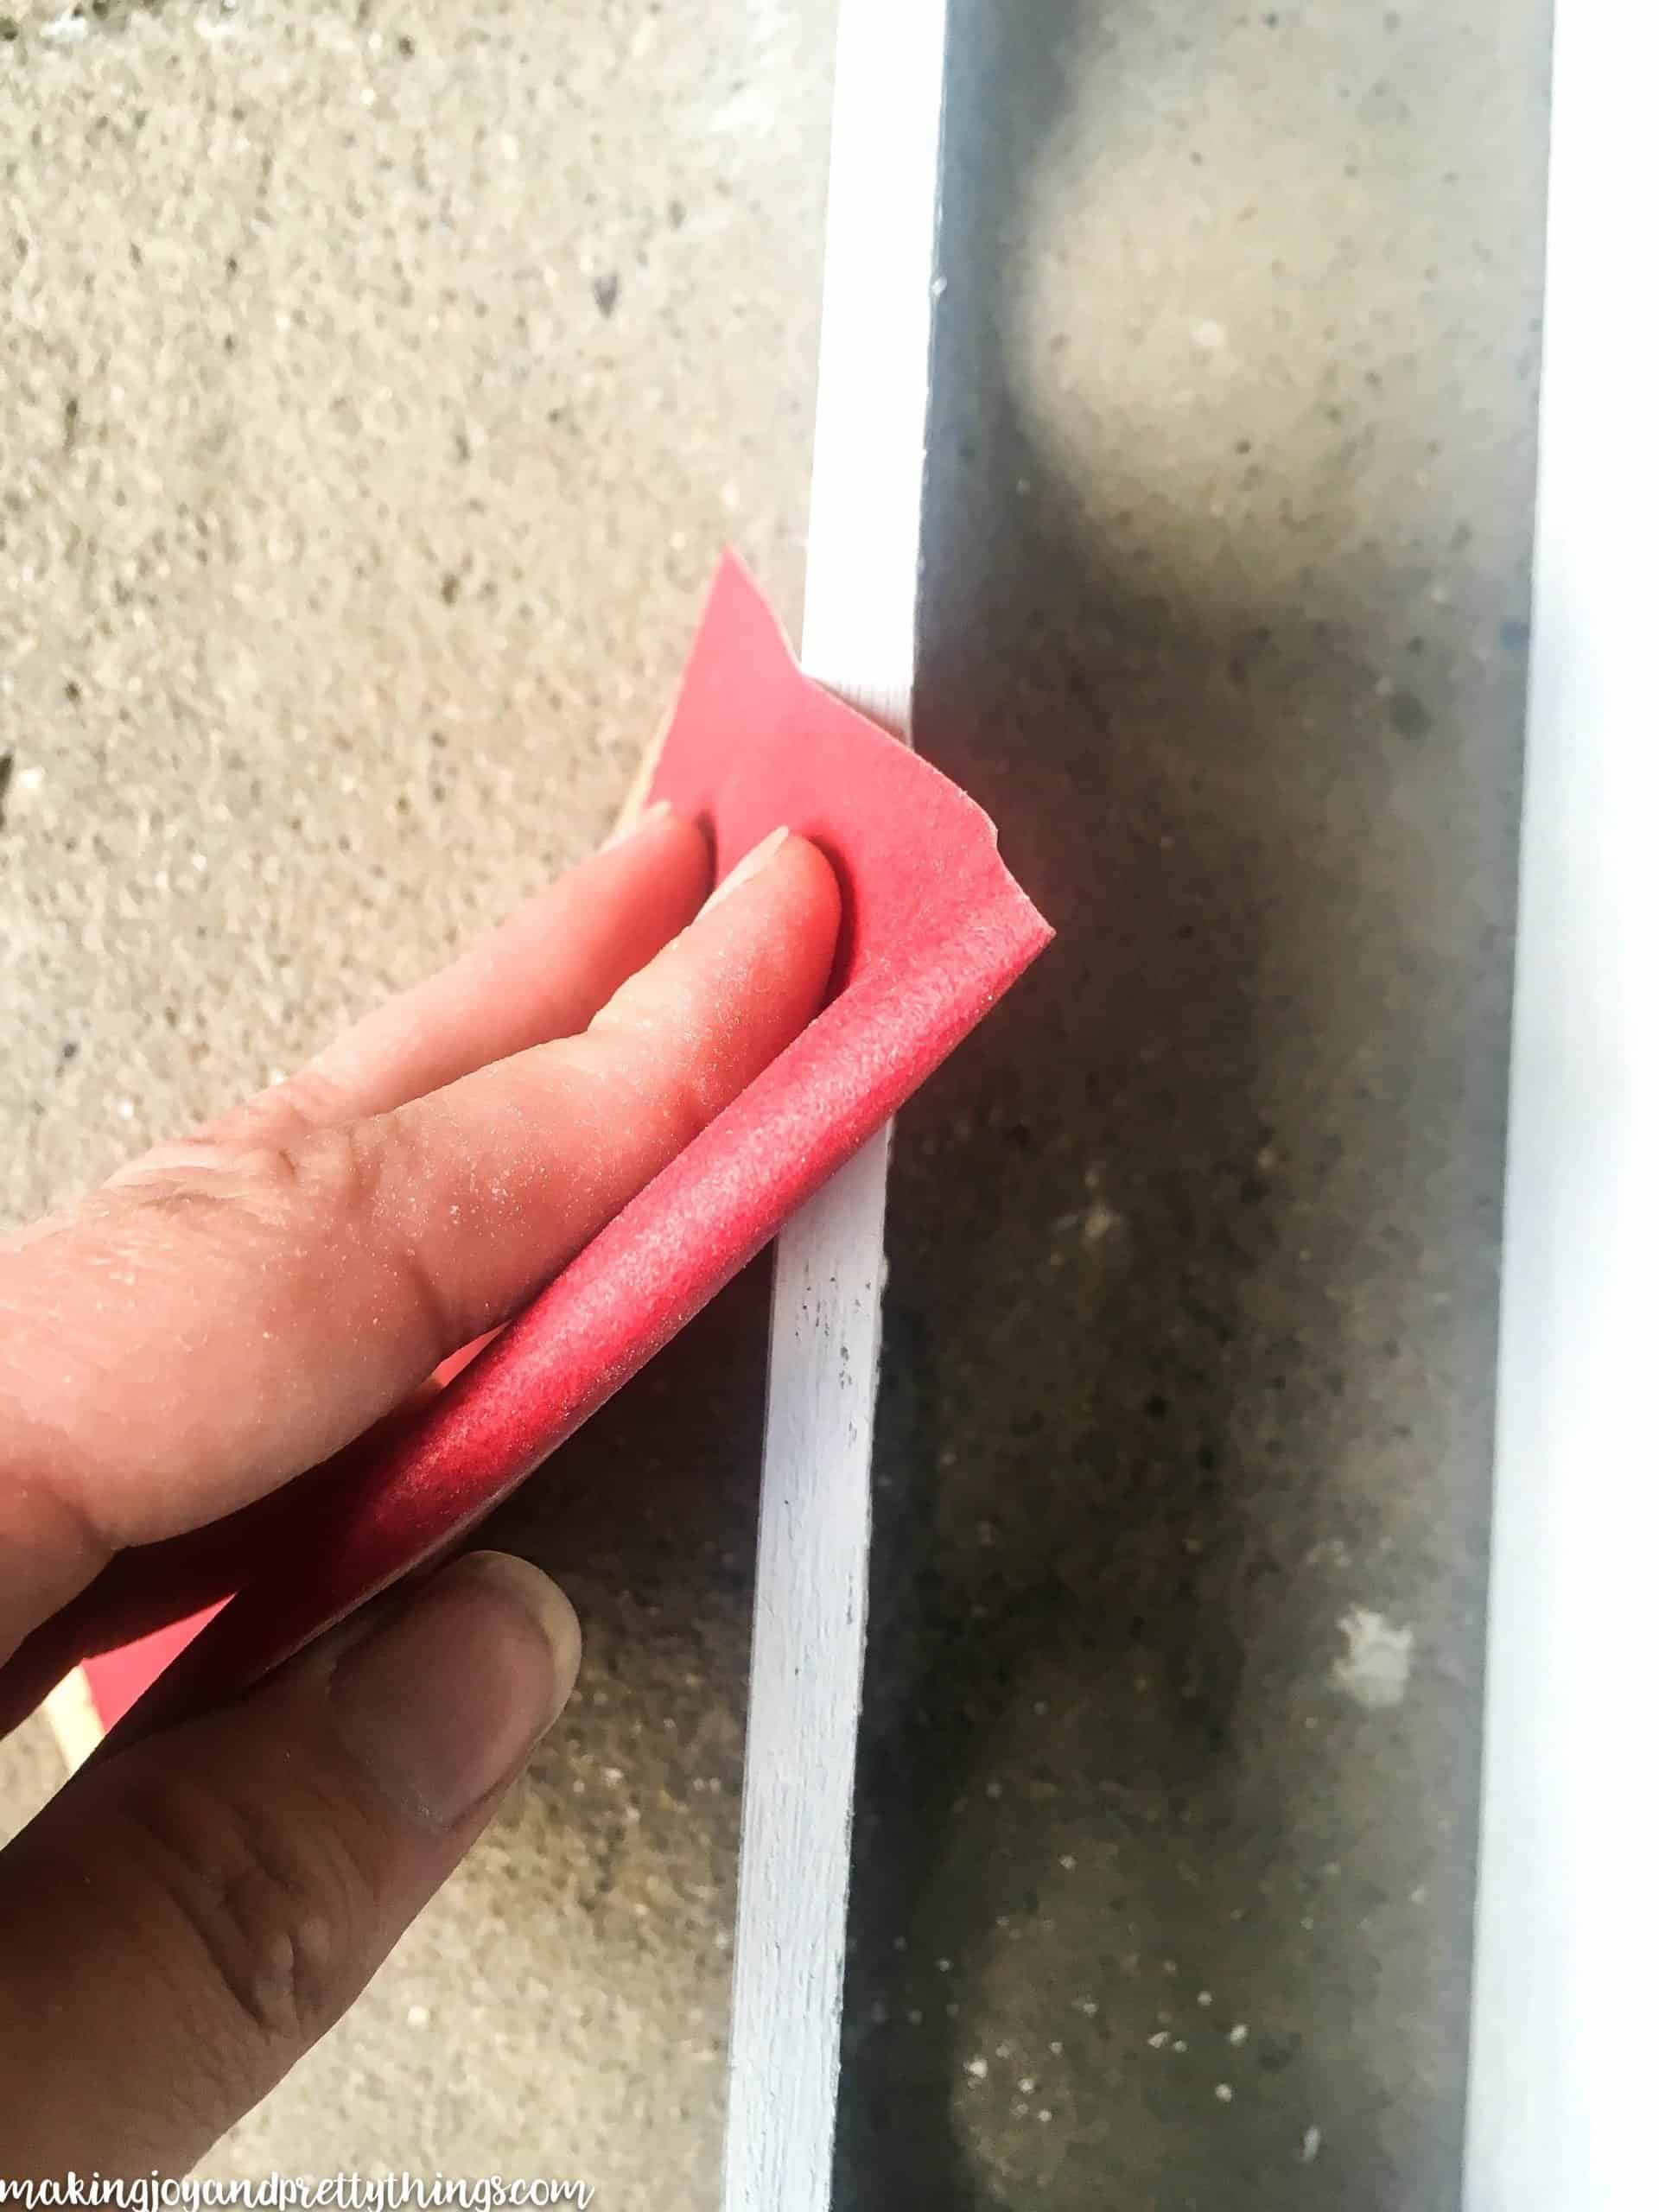 A hang holding a piece of red sandpaper, sanding down the painted surface of a wooden box to give it a distressed finish.